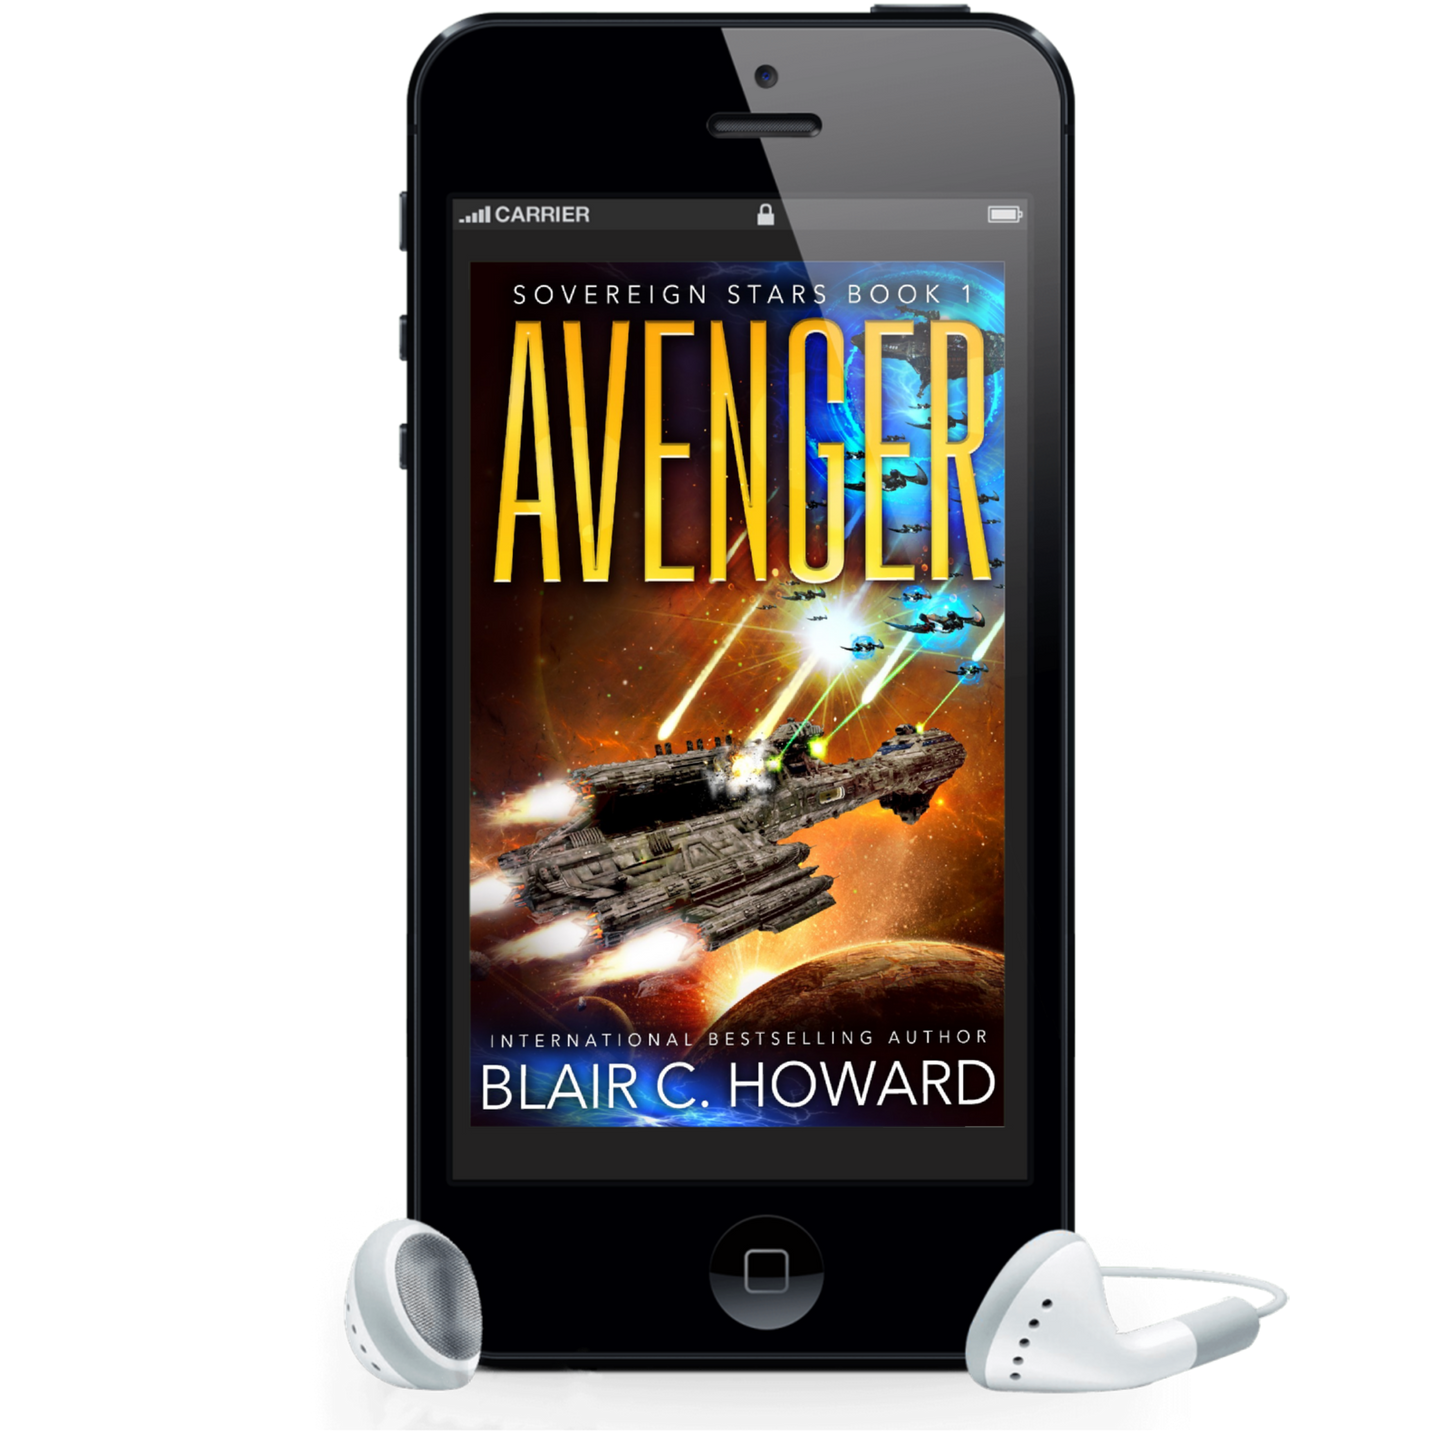 Buy the Avenger Audiobook Direct and Save!